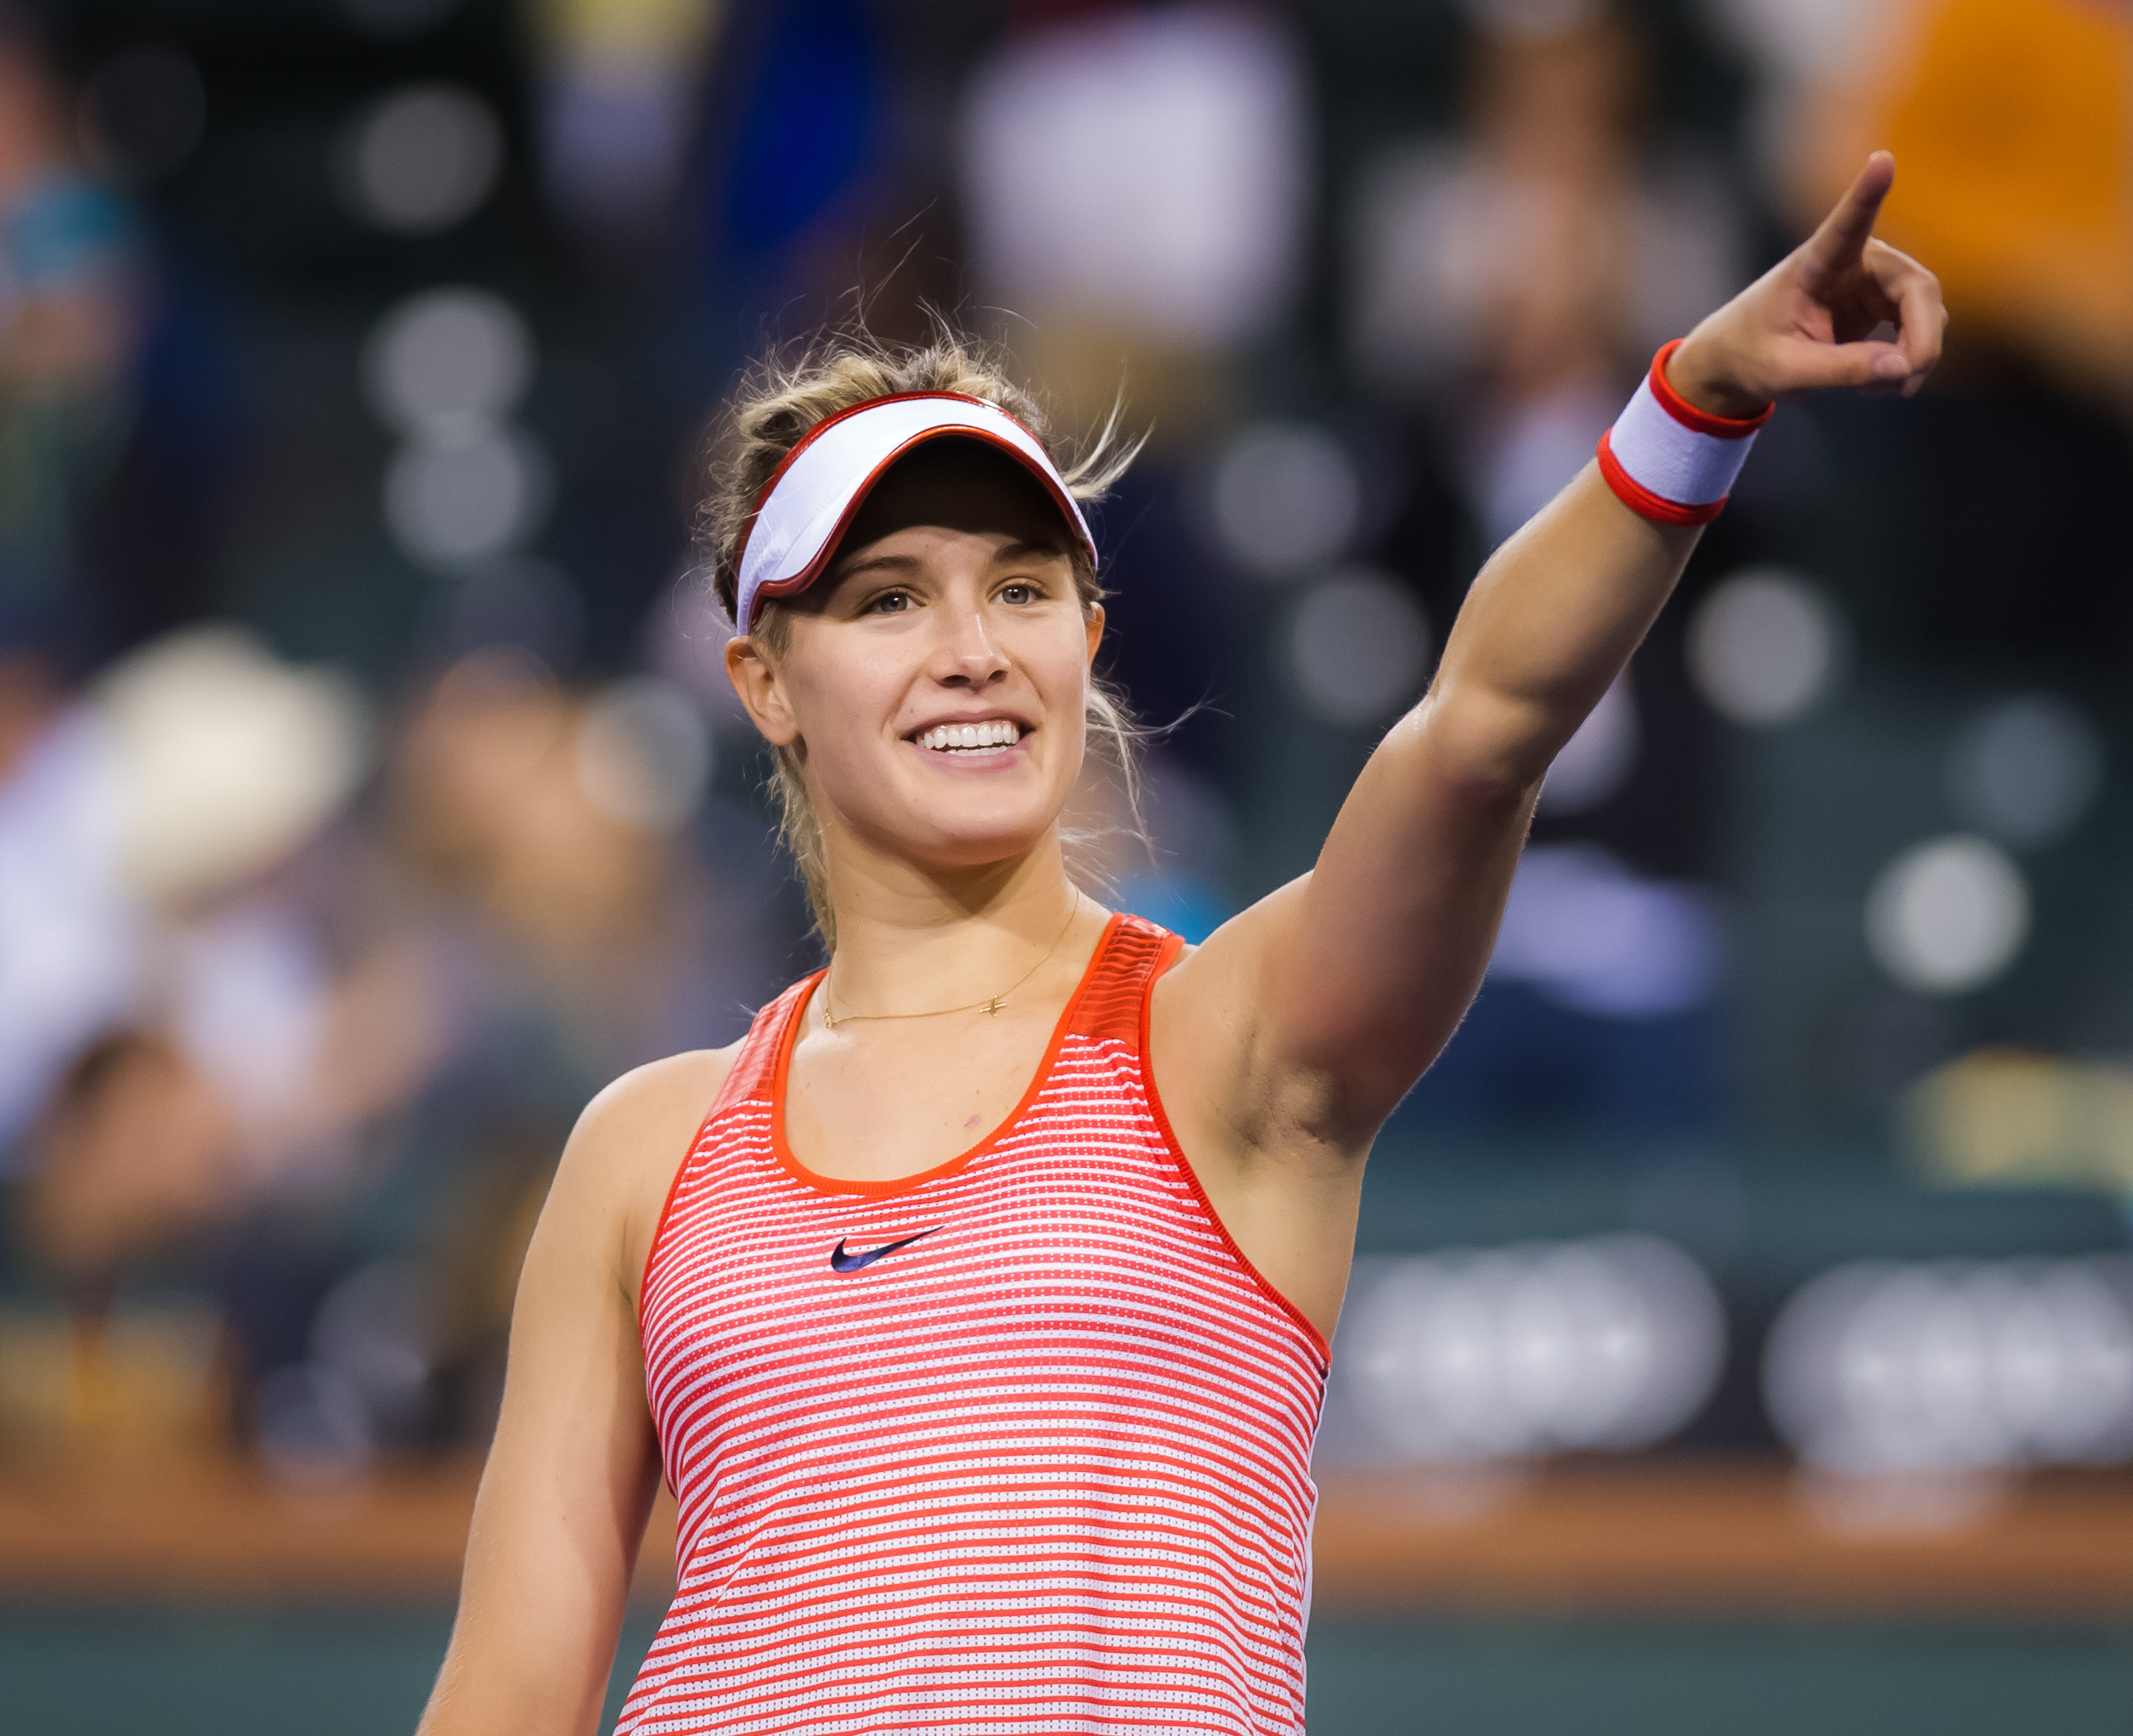 amazing eugenie bouchard cute smile with showing hand to audience pose background wallpaper free hd mobile